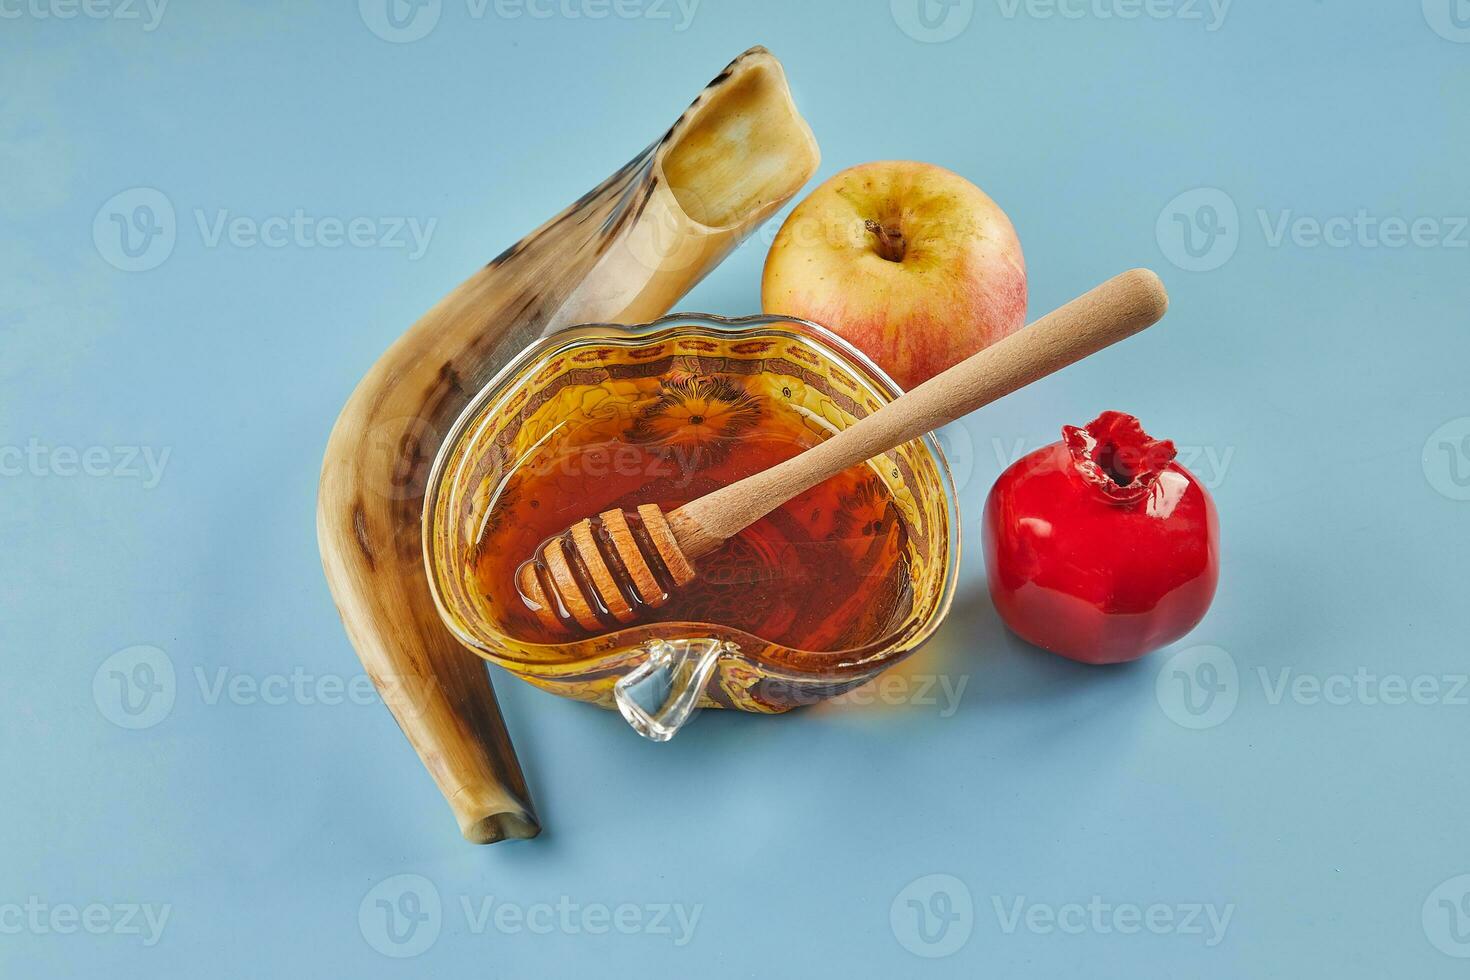 Rosh hashanah - jewish new year holiday concept. Bowl in the shape of an apple with honey, apples, pomegranates, shofar on a blue background photo